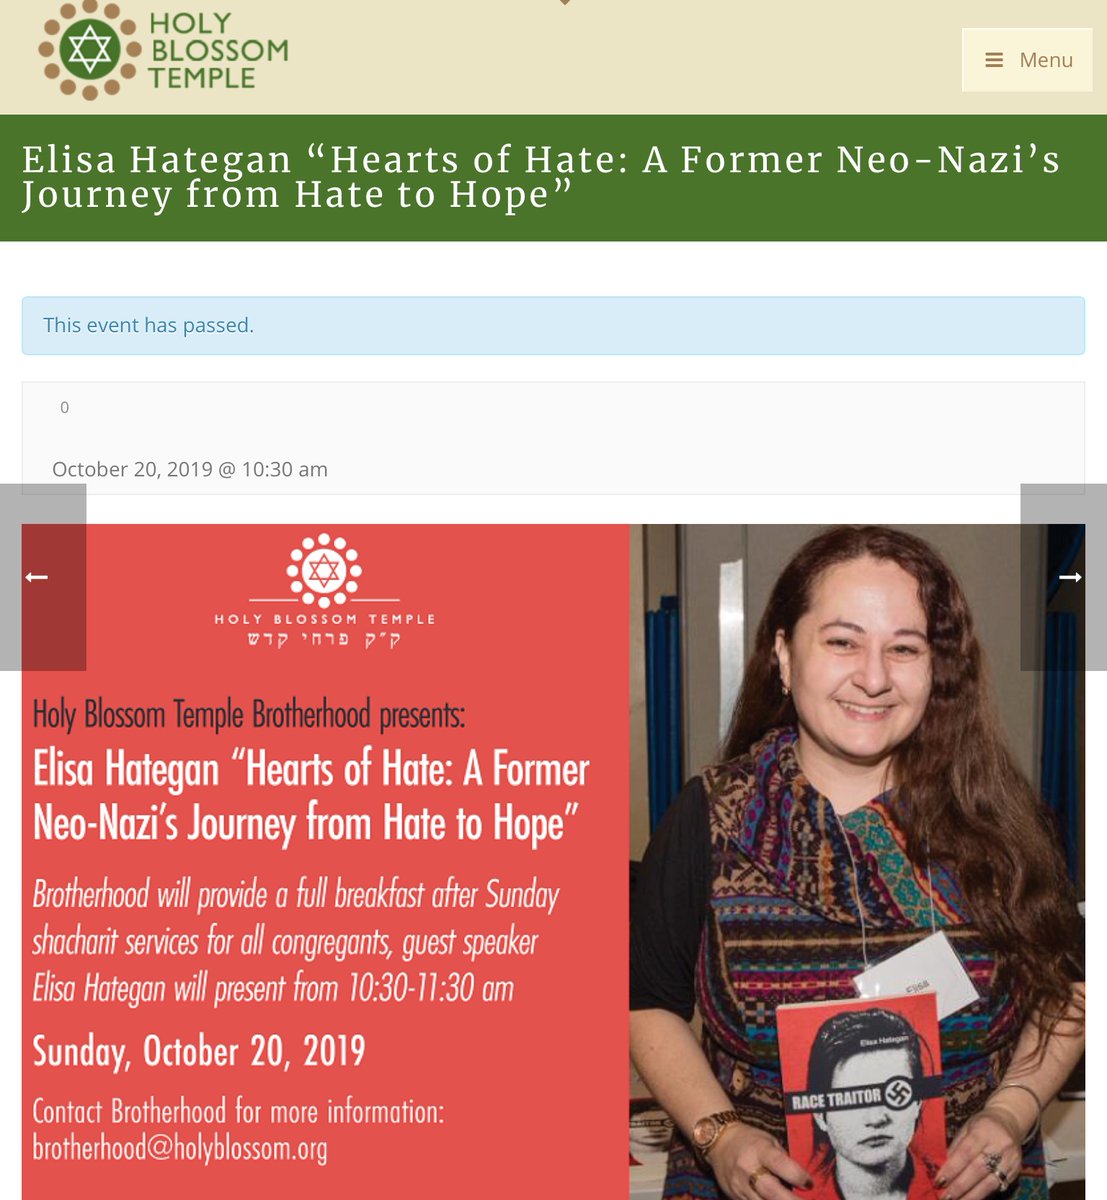 Not only did  @onemooreliz steal my life story, sell it to the  @CBC for $12K and go on  @Spaikin's show to claim SHE shut down the neo-Nazi group I risked my life to shut down, in 2020 she took my main lecture title "From Hate to Hope" & started calling her talk "From Hate to Love"